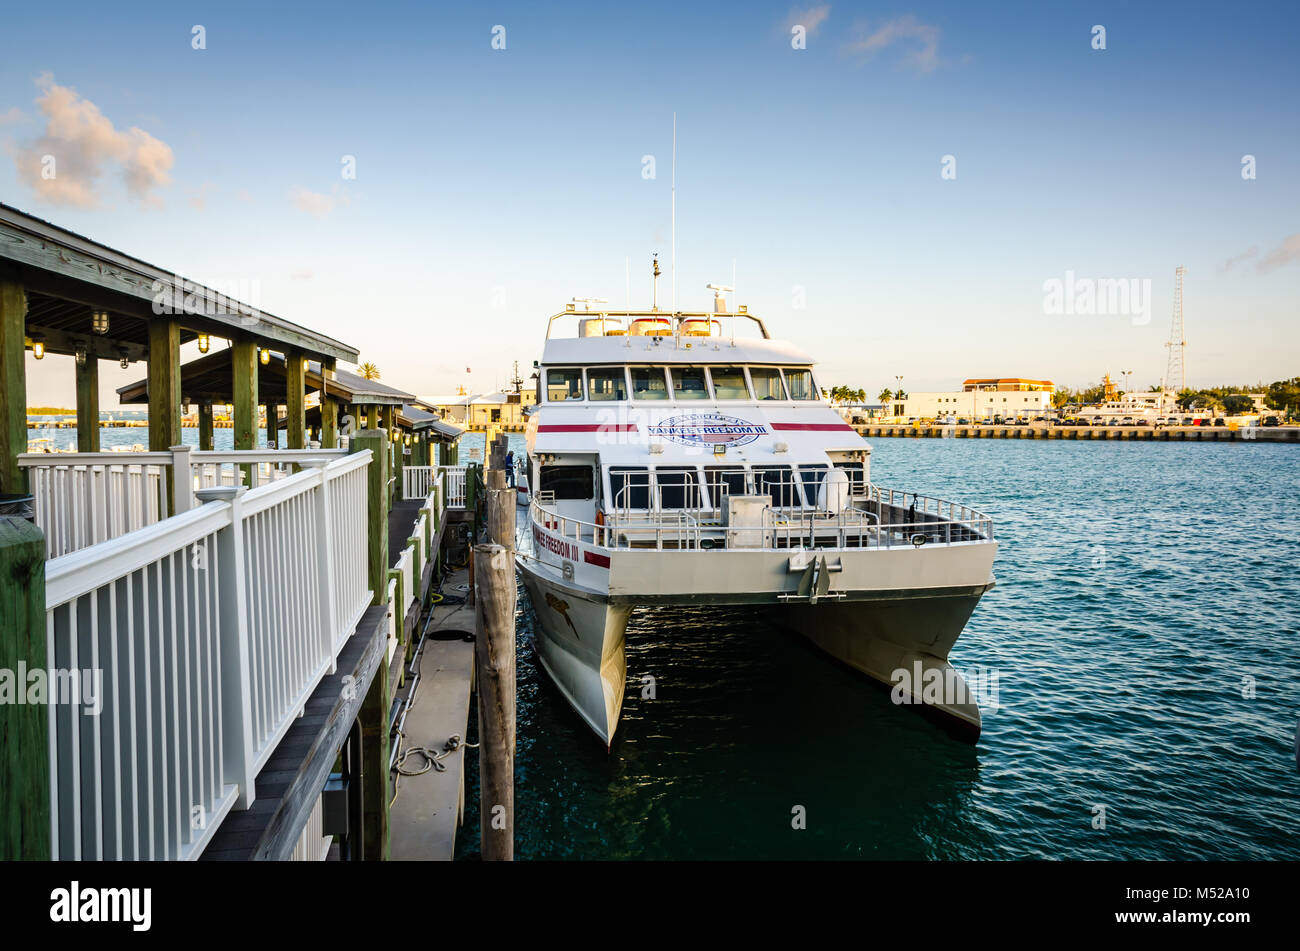 Yankee Freedom, early morning ferry that carries passengers from Key West, Florida to Dry Tortugas National Park. Stock Photo